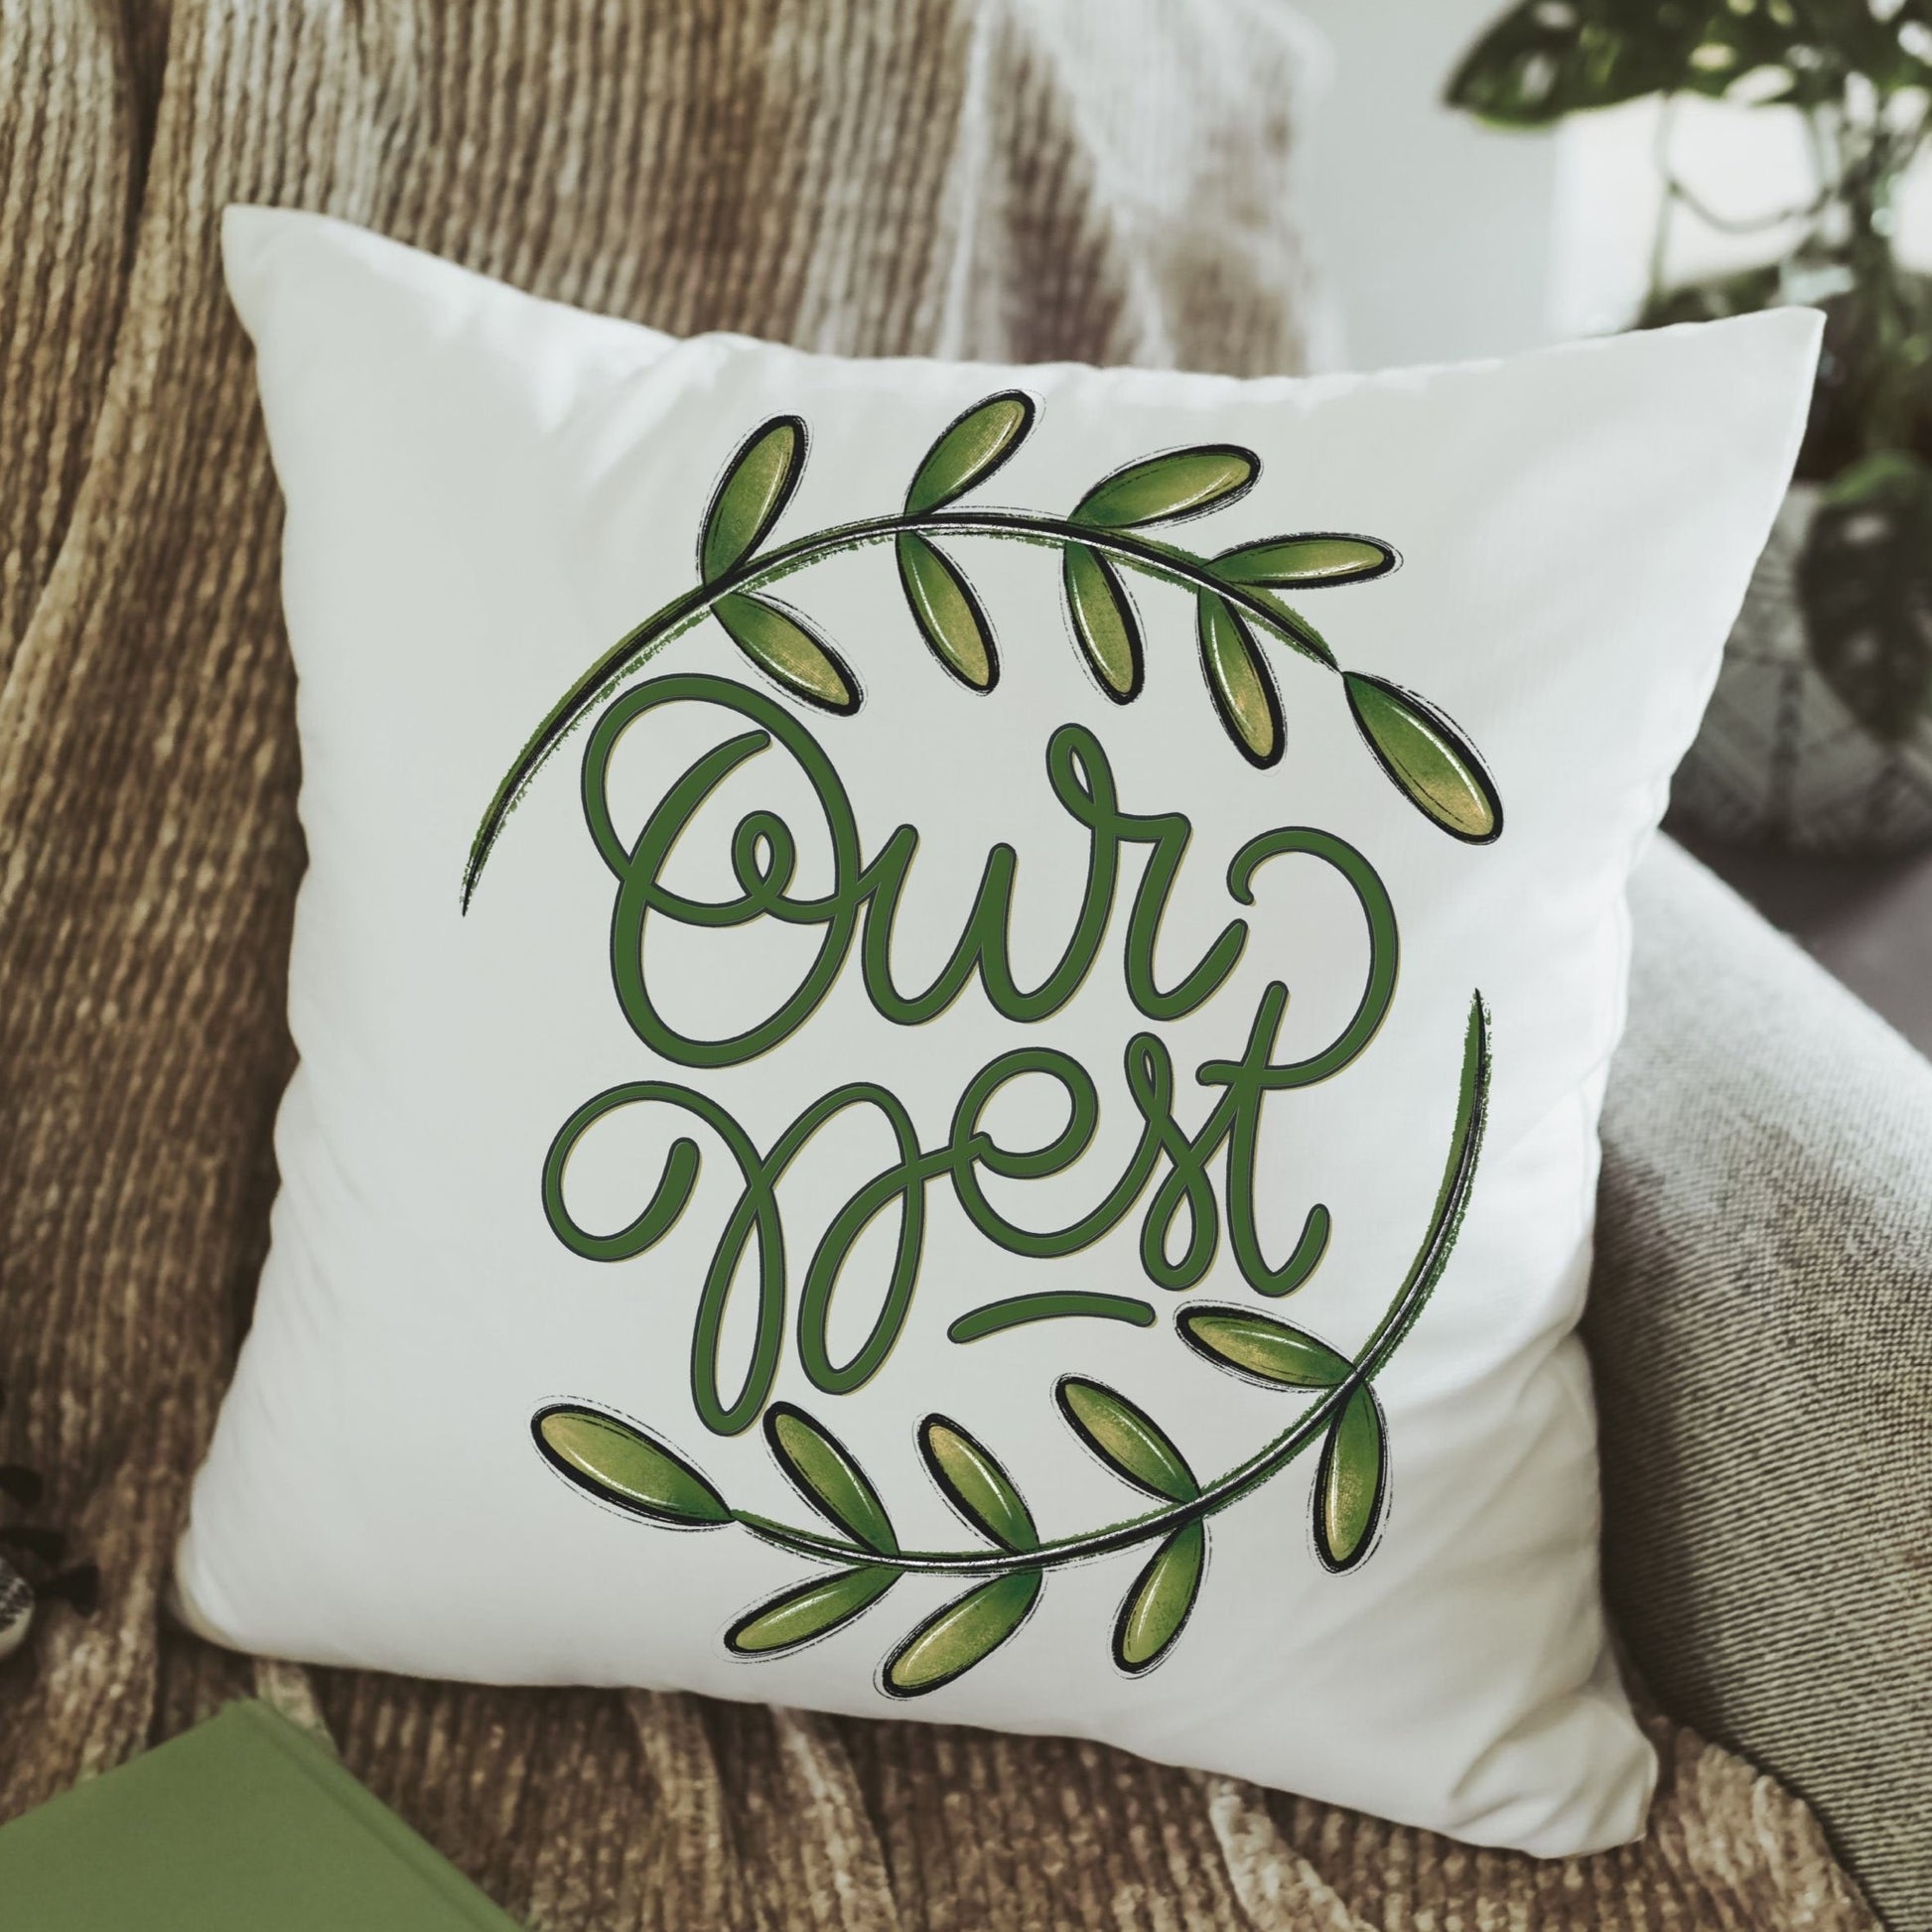 Our Nest Throw Pillow and Towel Gift Set